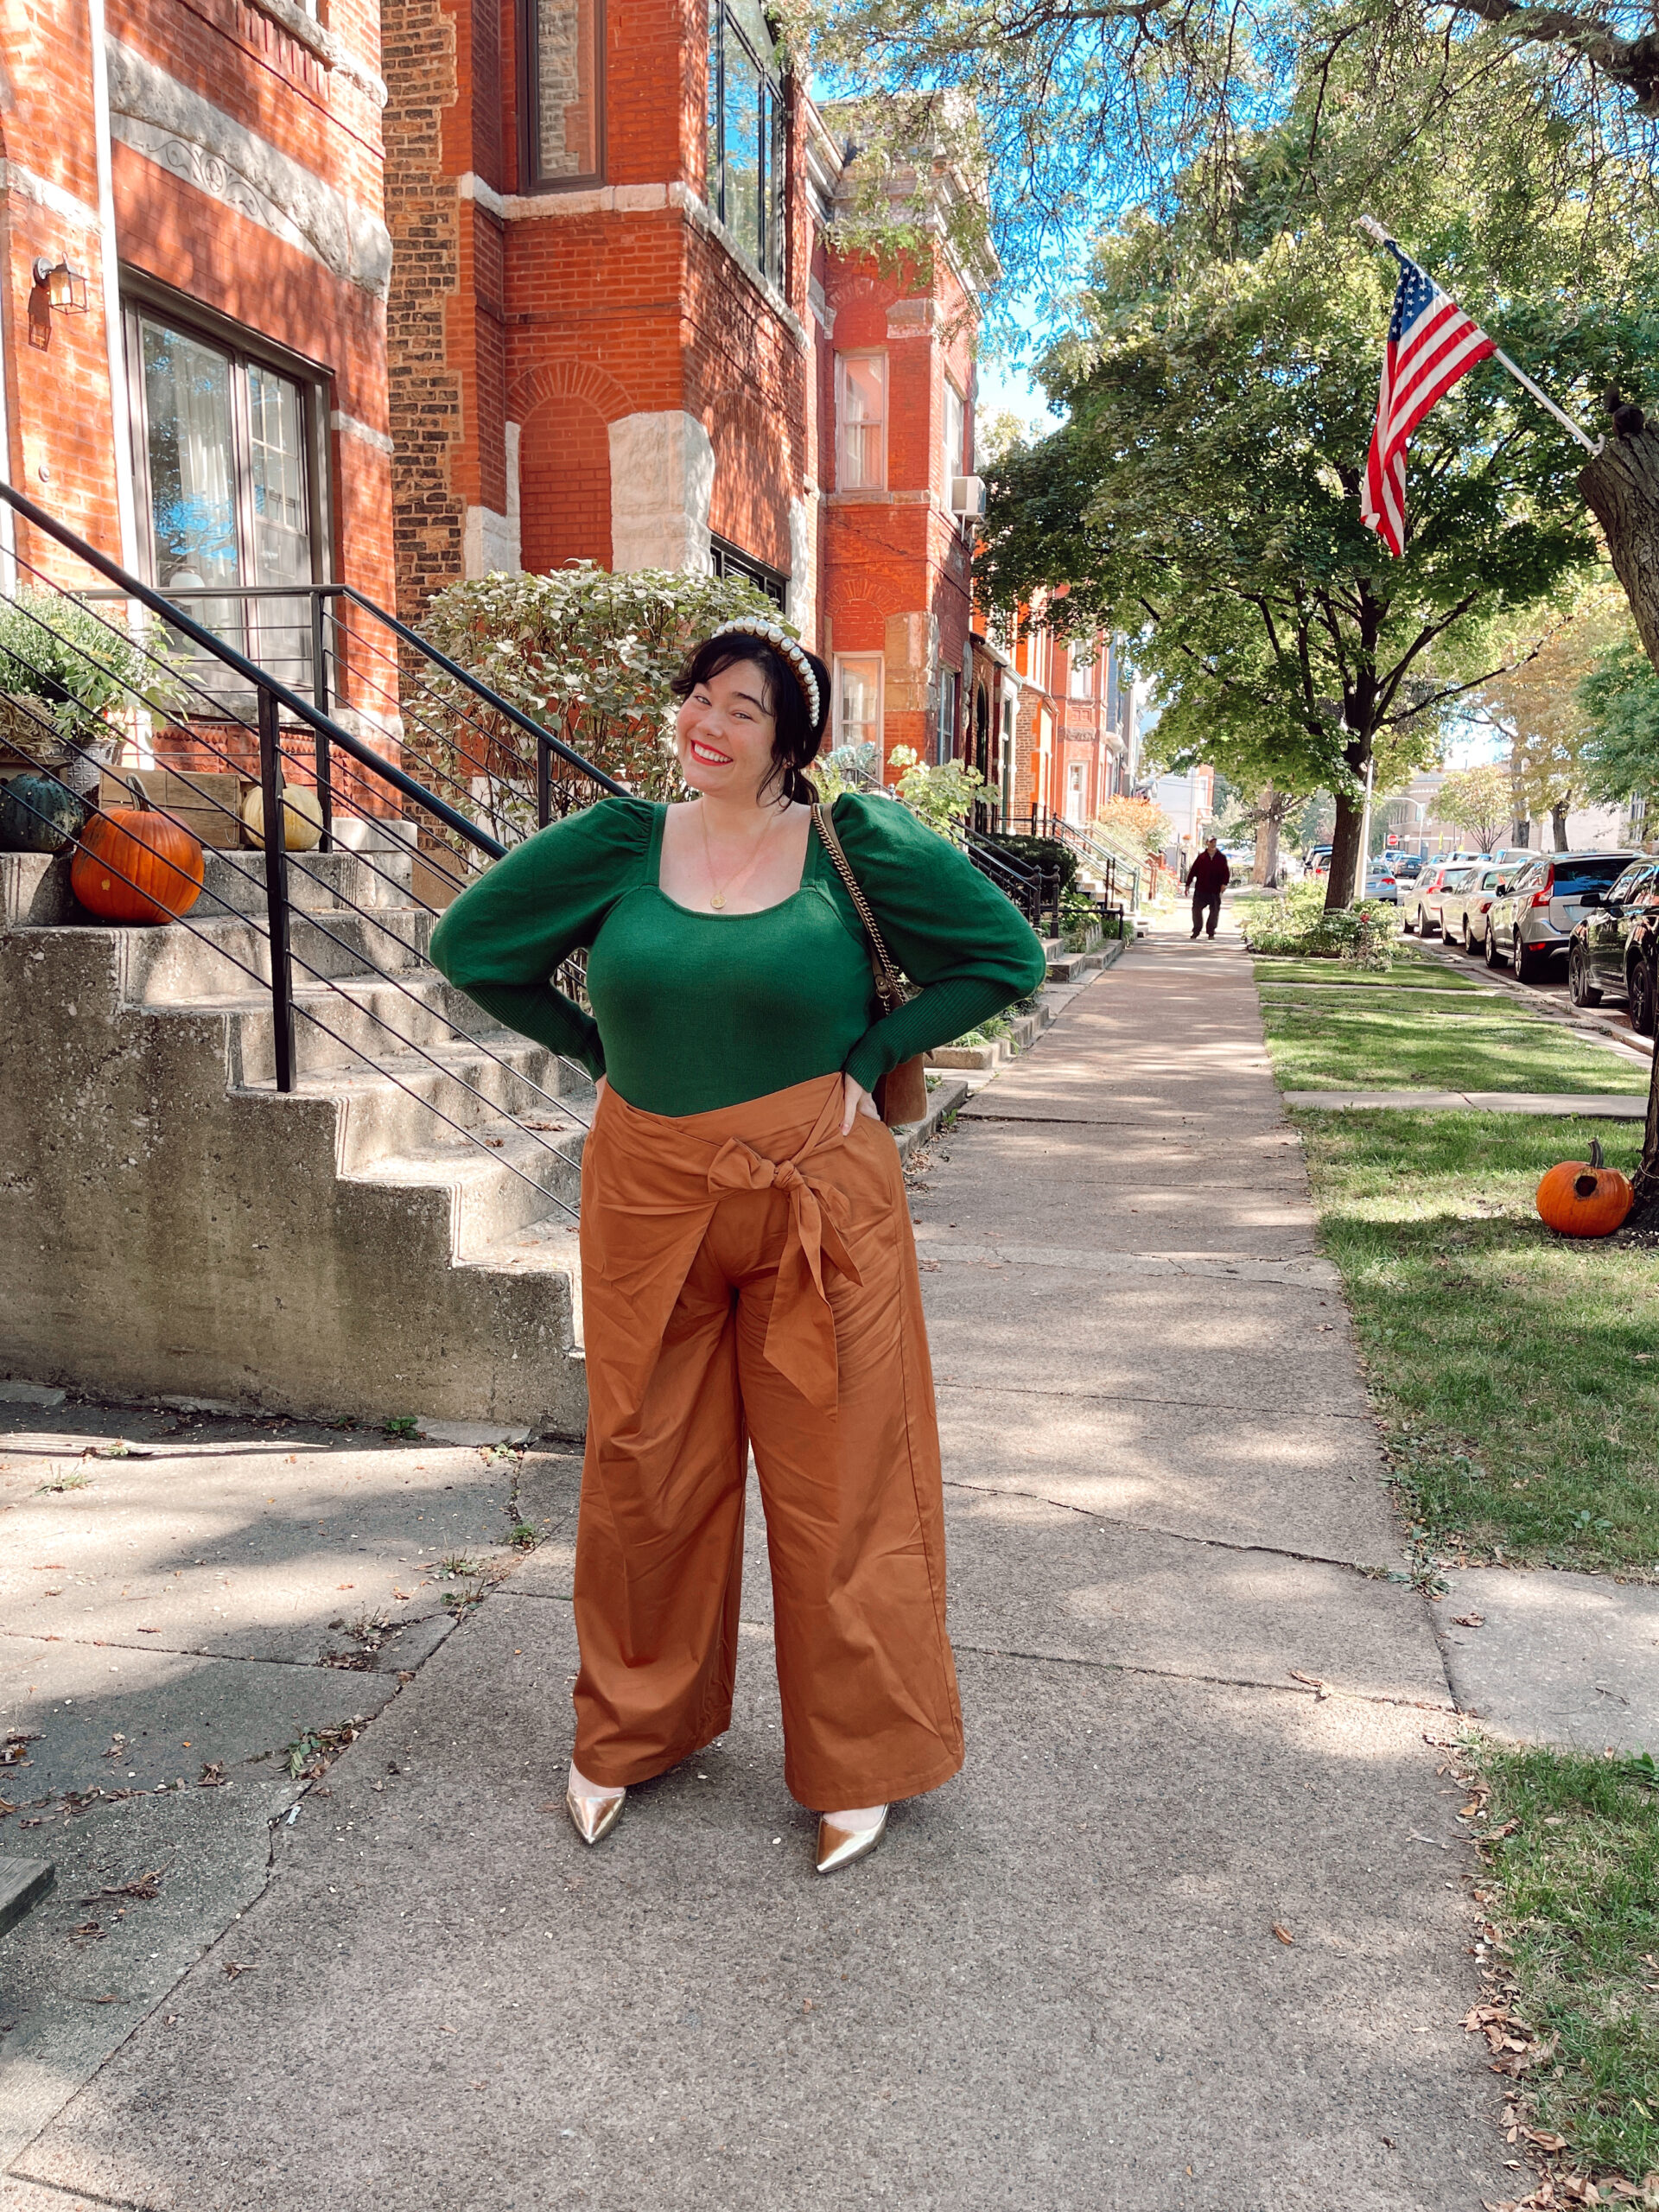 plus size blogger wearing a green and tan outfit for fall